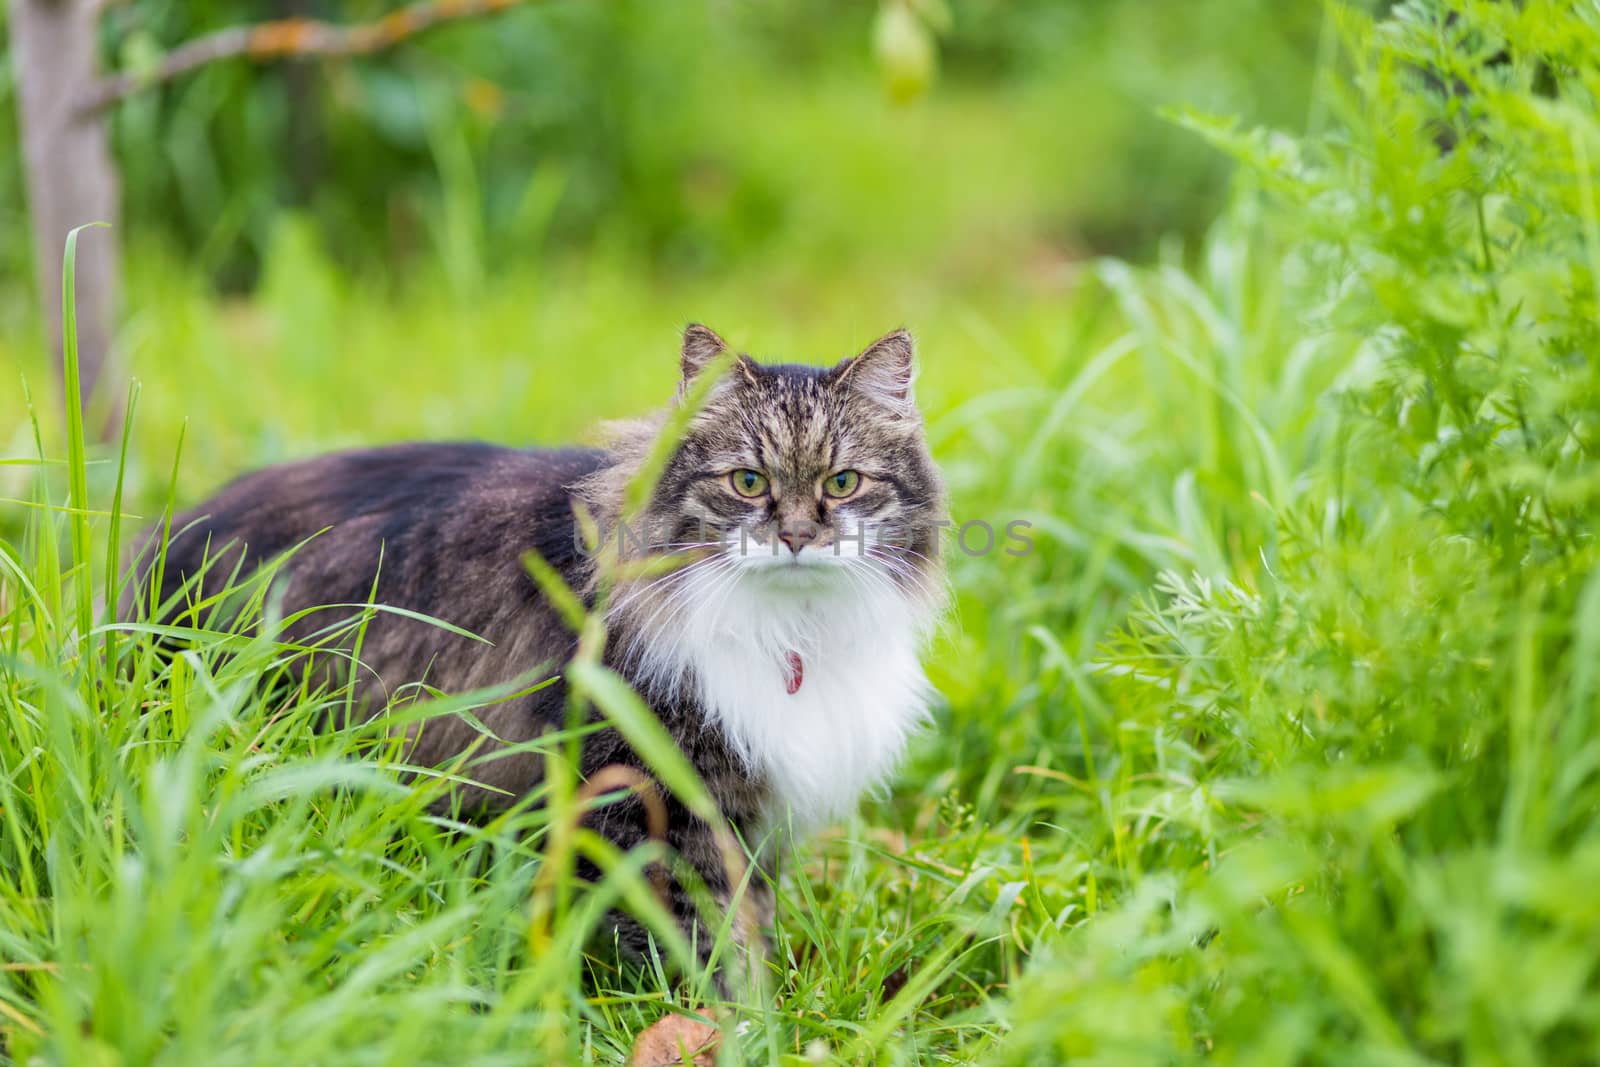 A fluffy striped cat sits on the grass and looks at the camera by galinasharapova